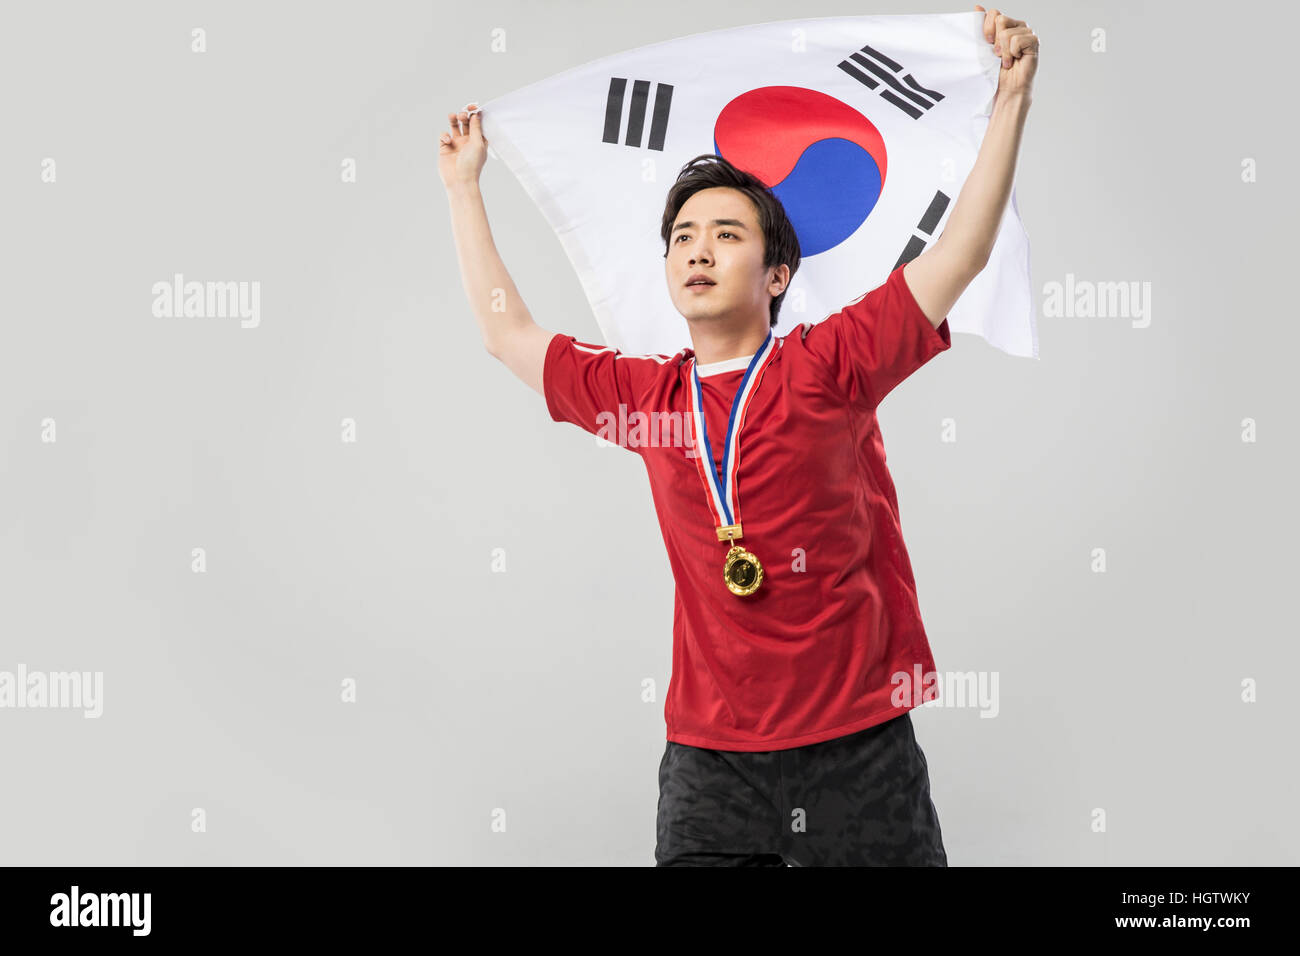 Young Korean male sports player with gold medal posing with Korean flag Stock Photo